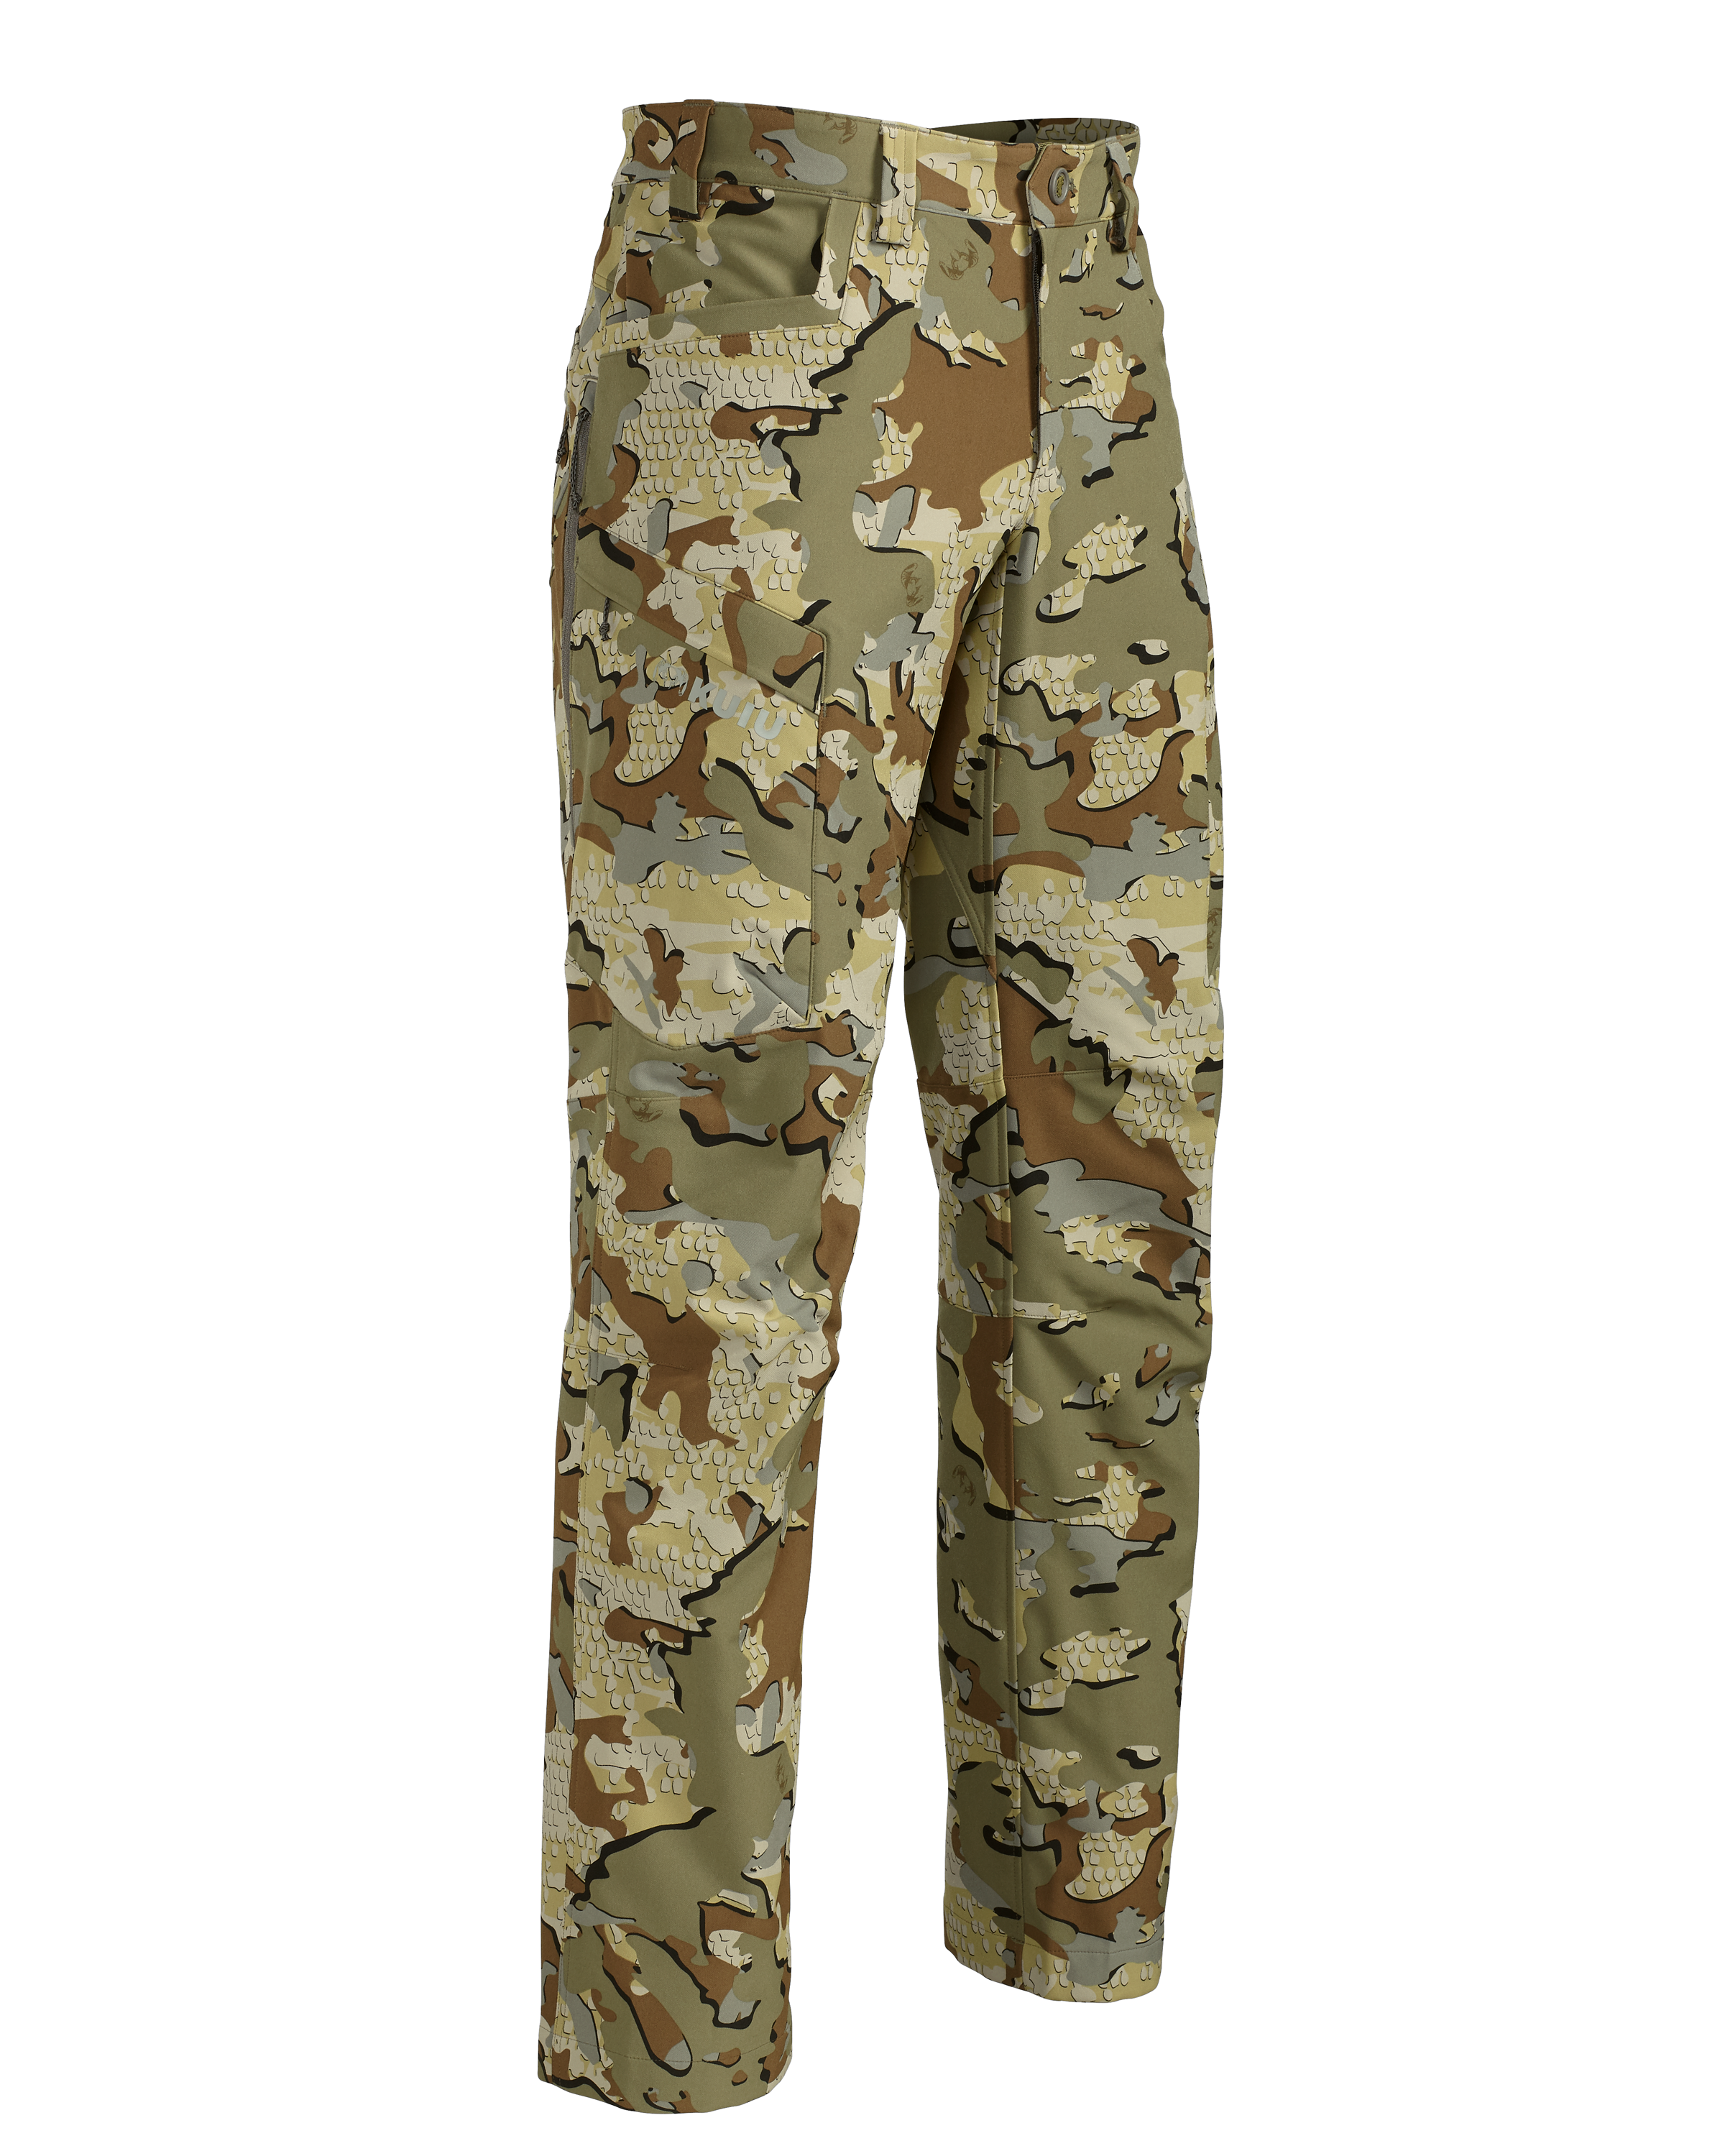 KUIU Attack Hunting Pant in Valo | Size 28